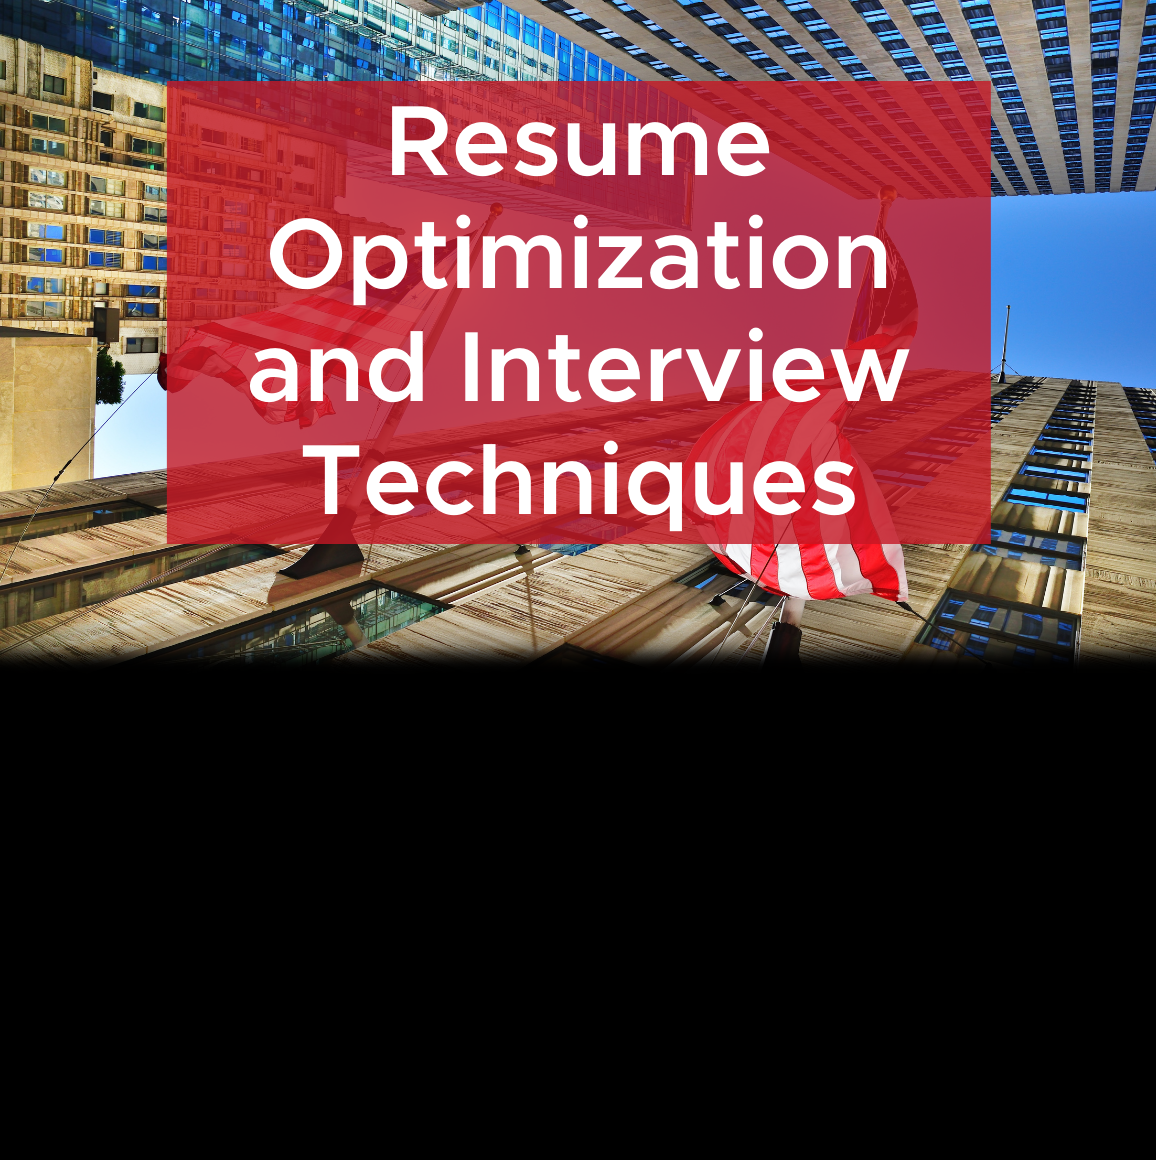 Resume Optimization and Interview Techniques